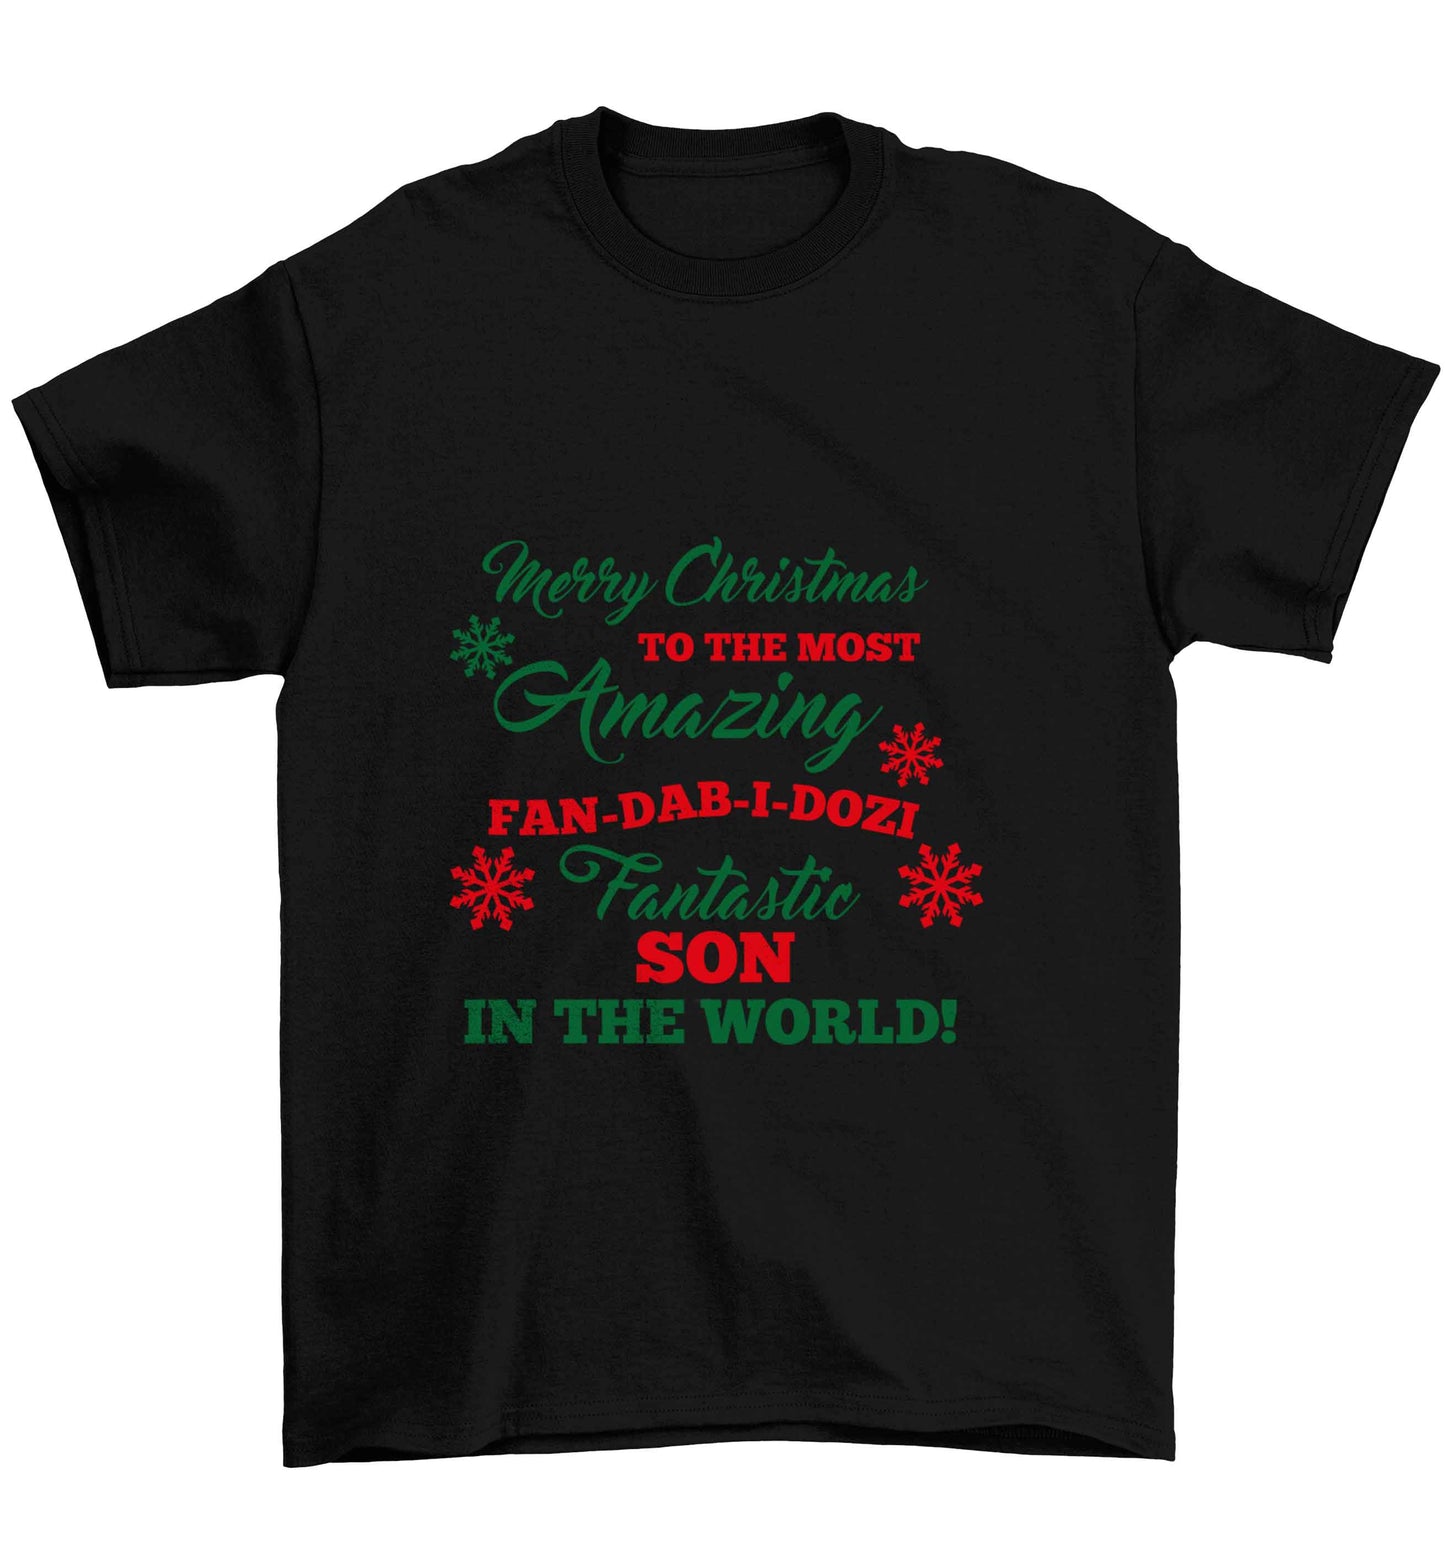 Merry Christmas to the most amazing fan-dab-i-dozi fantasic Son in the world Children's black Tshirt 12-13 Years